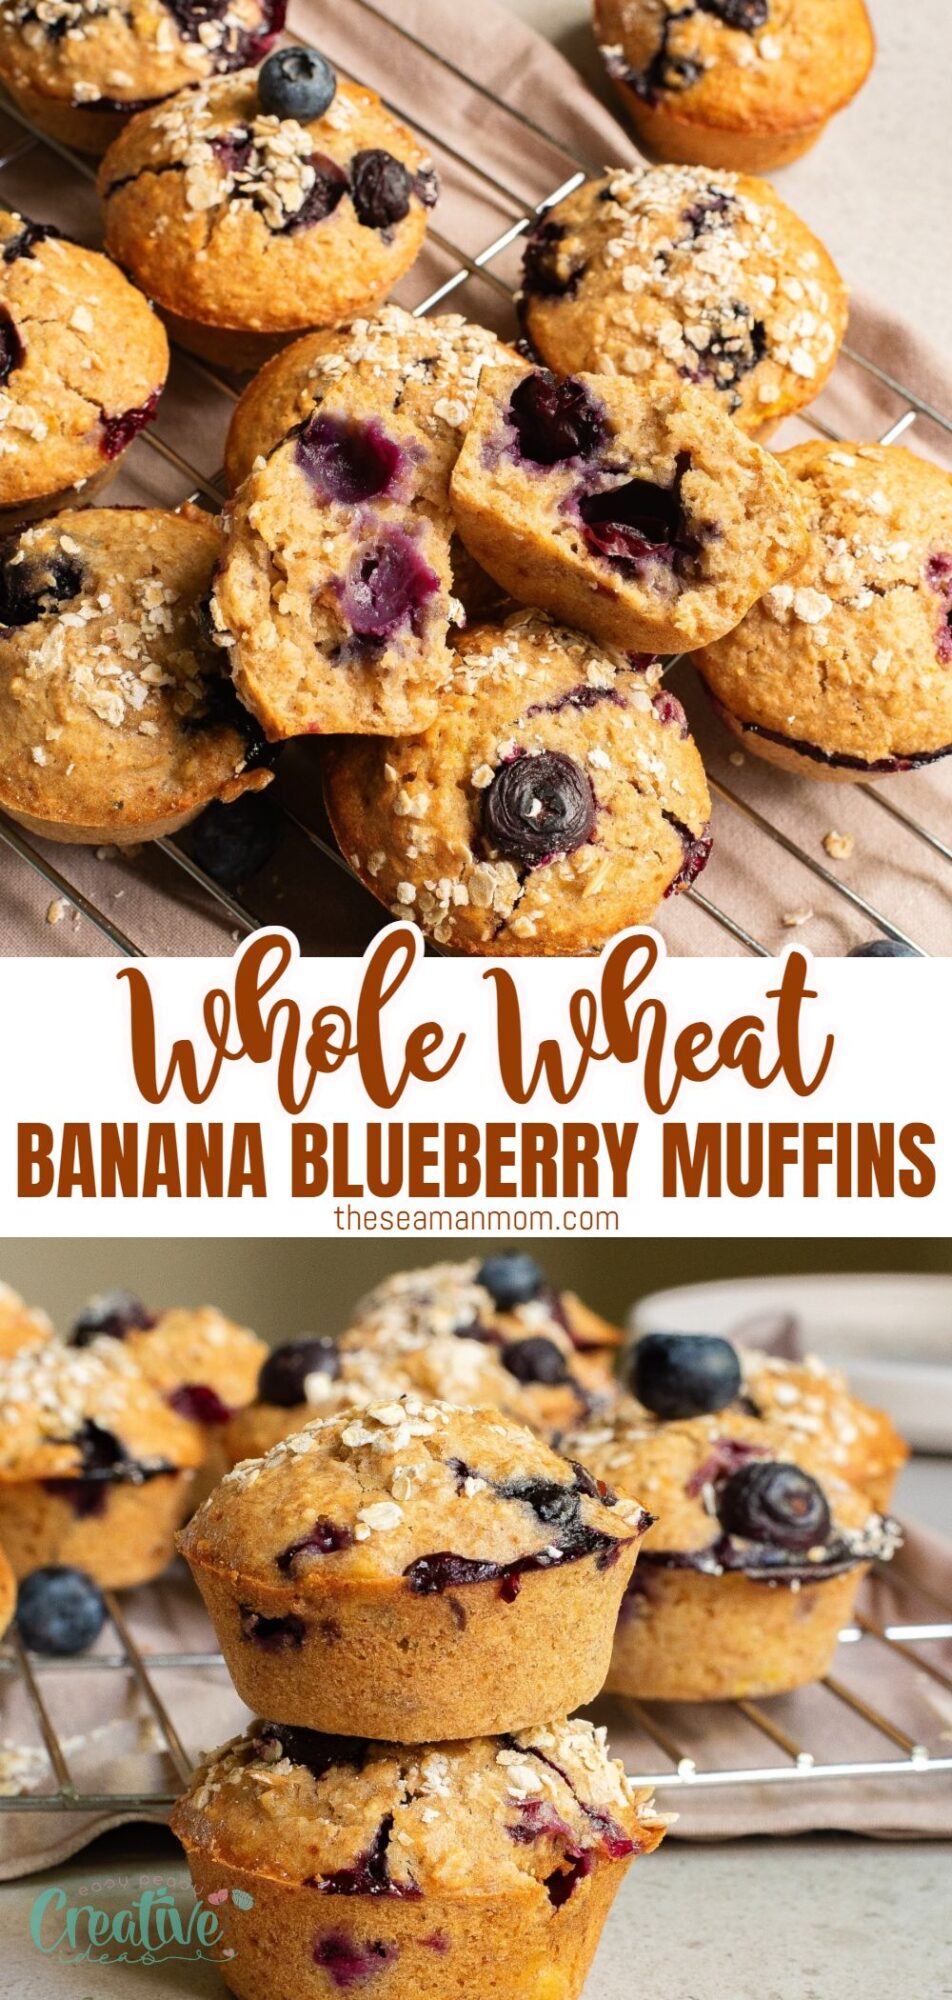 Whole wheat banana muffins: moist, flavorful, and packed with fiber. A tasty treat combining whole wheat goodness with ripe bananas. Ideal for breakfast, snack, or a sweet finish. Customize with add-ins and substitutions!